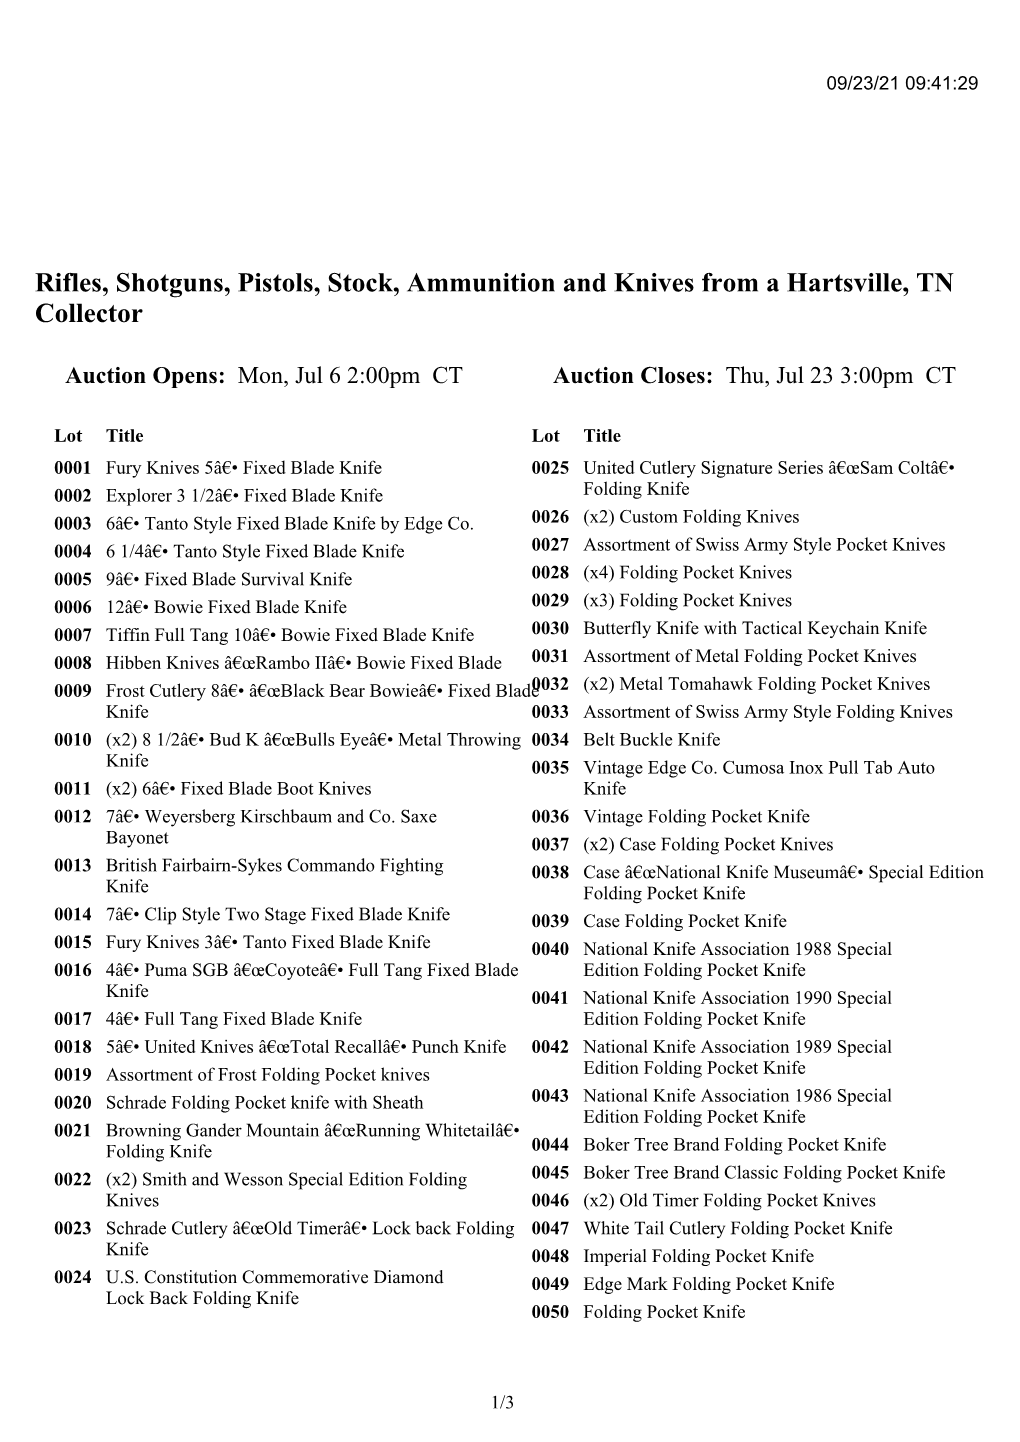 Rifles, Shotguns, Pistols, Stock, Ammunition and Knives from a Hartsville, TN Collector